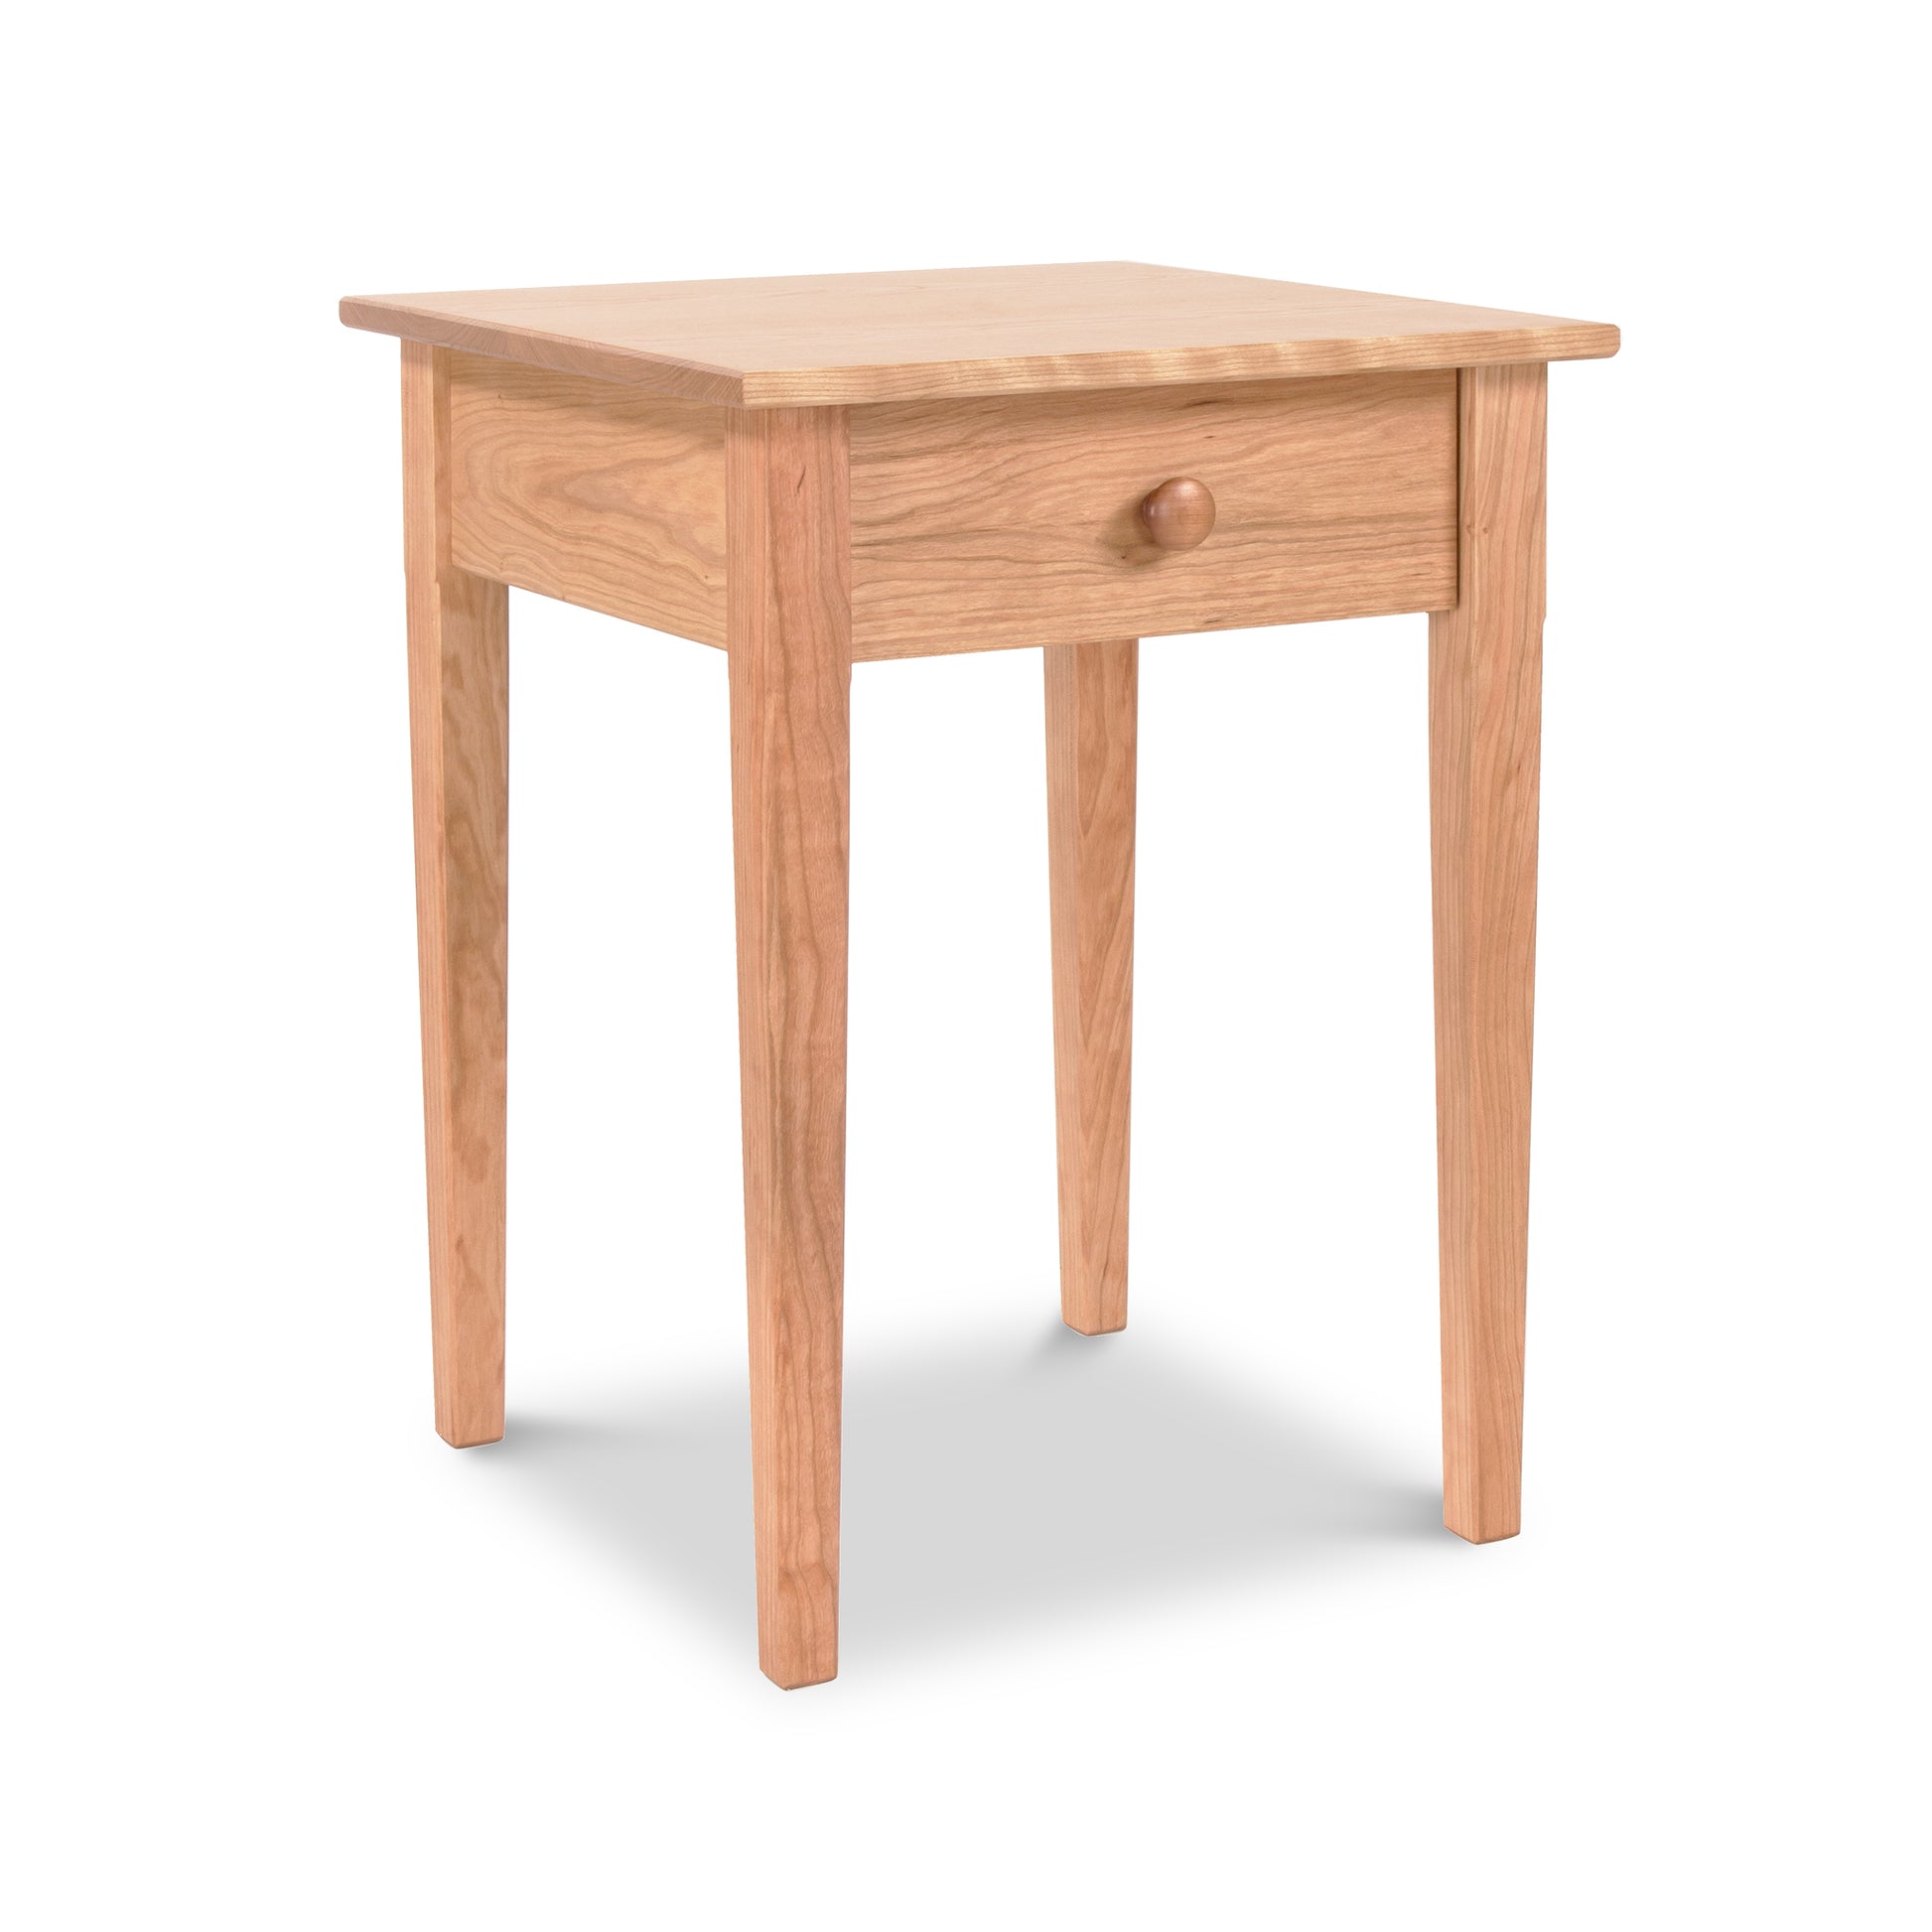 A Vermont Shaker Bedside Table from Maple Corner Woodworks, with one drawer and round knob, featuring slim, straight legs and a smooth top, isolated on a white background.